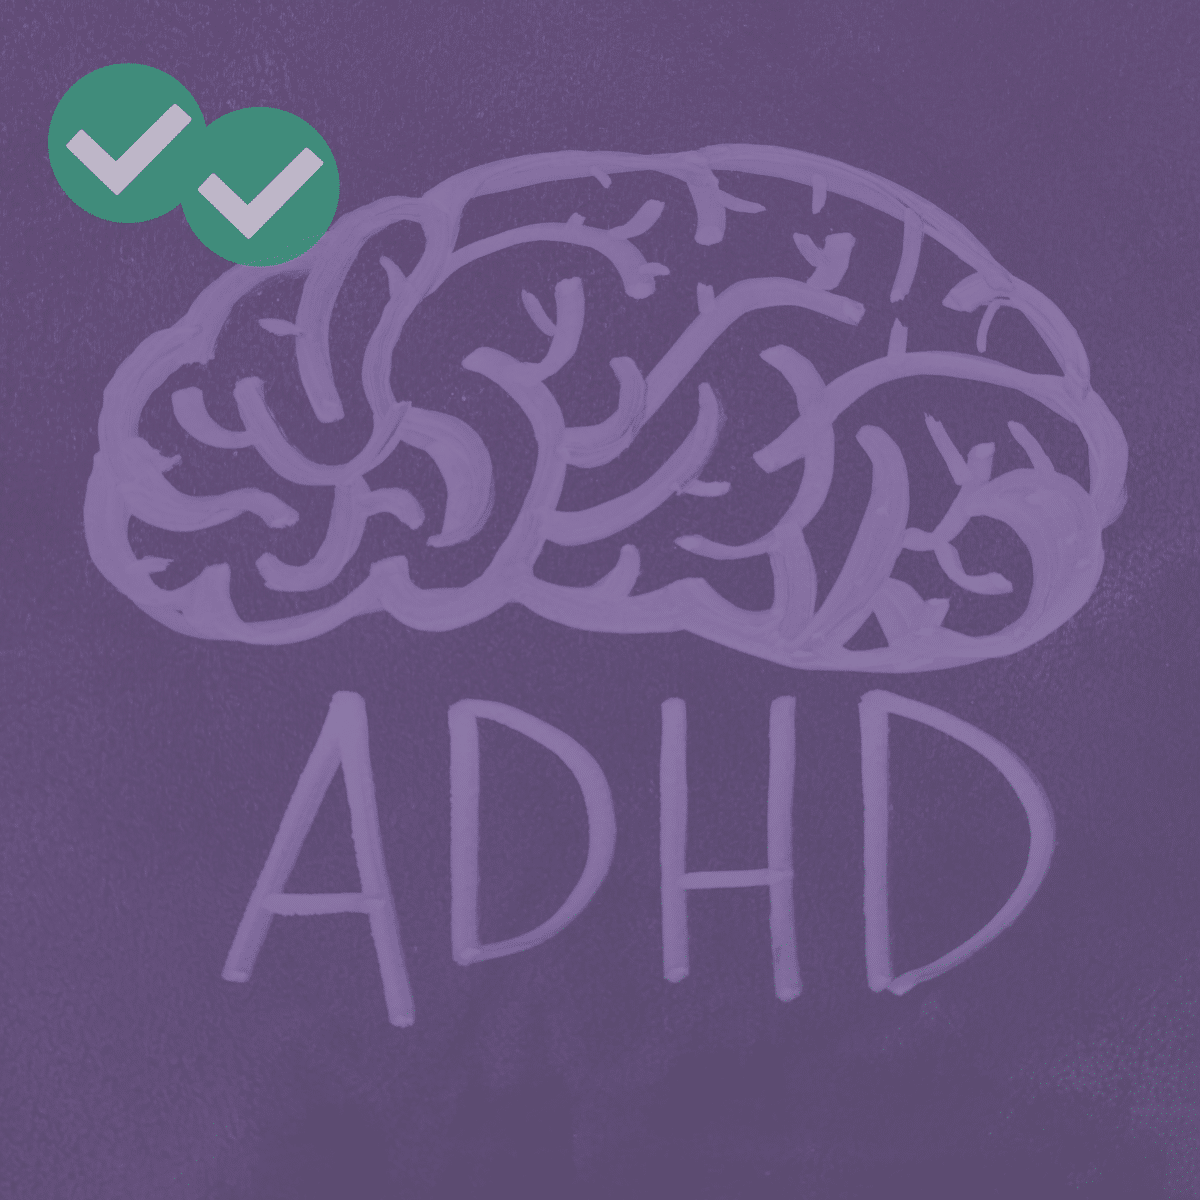 GRE Accommodations for ADHD: Strategies and Resources